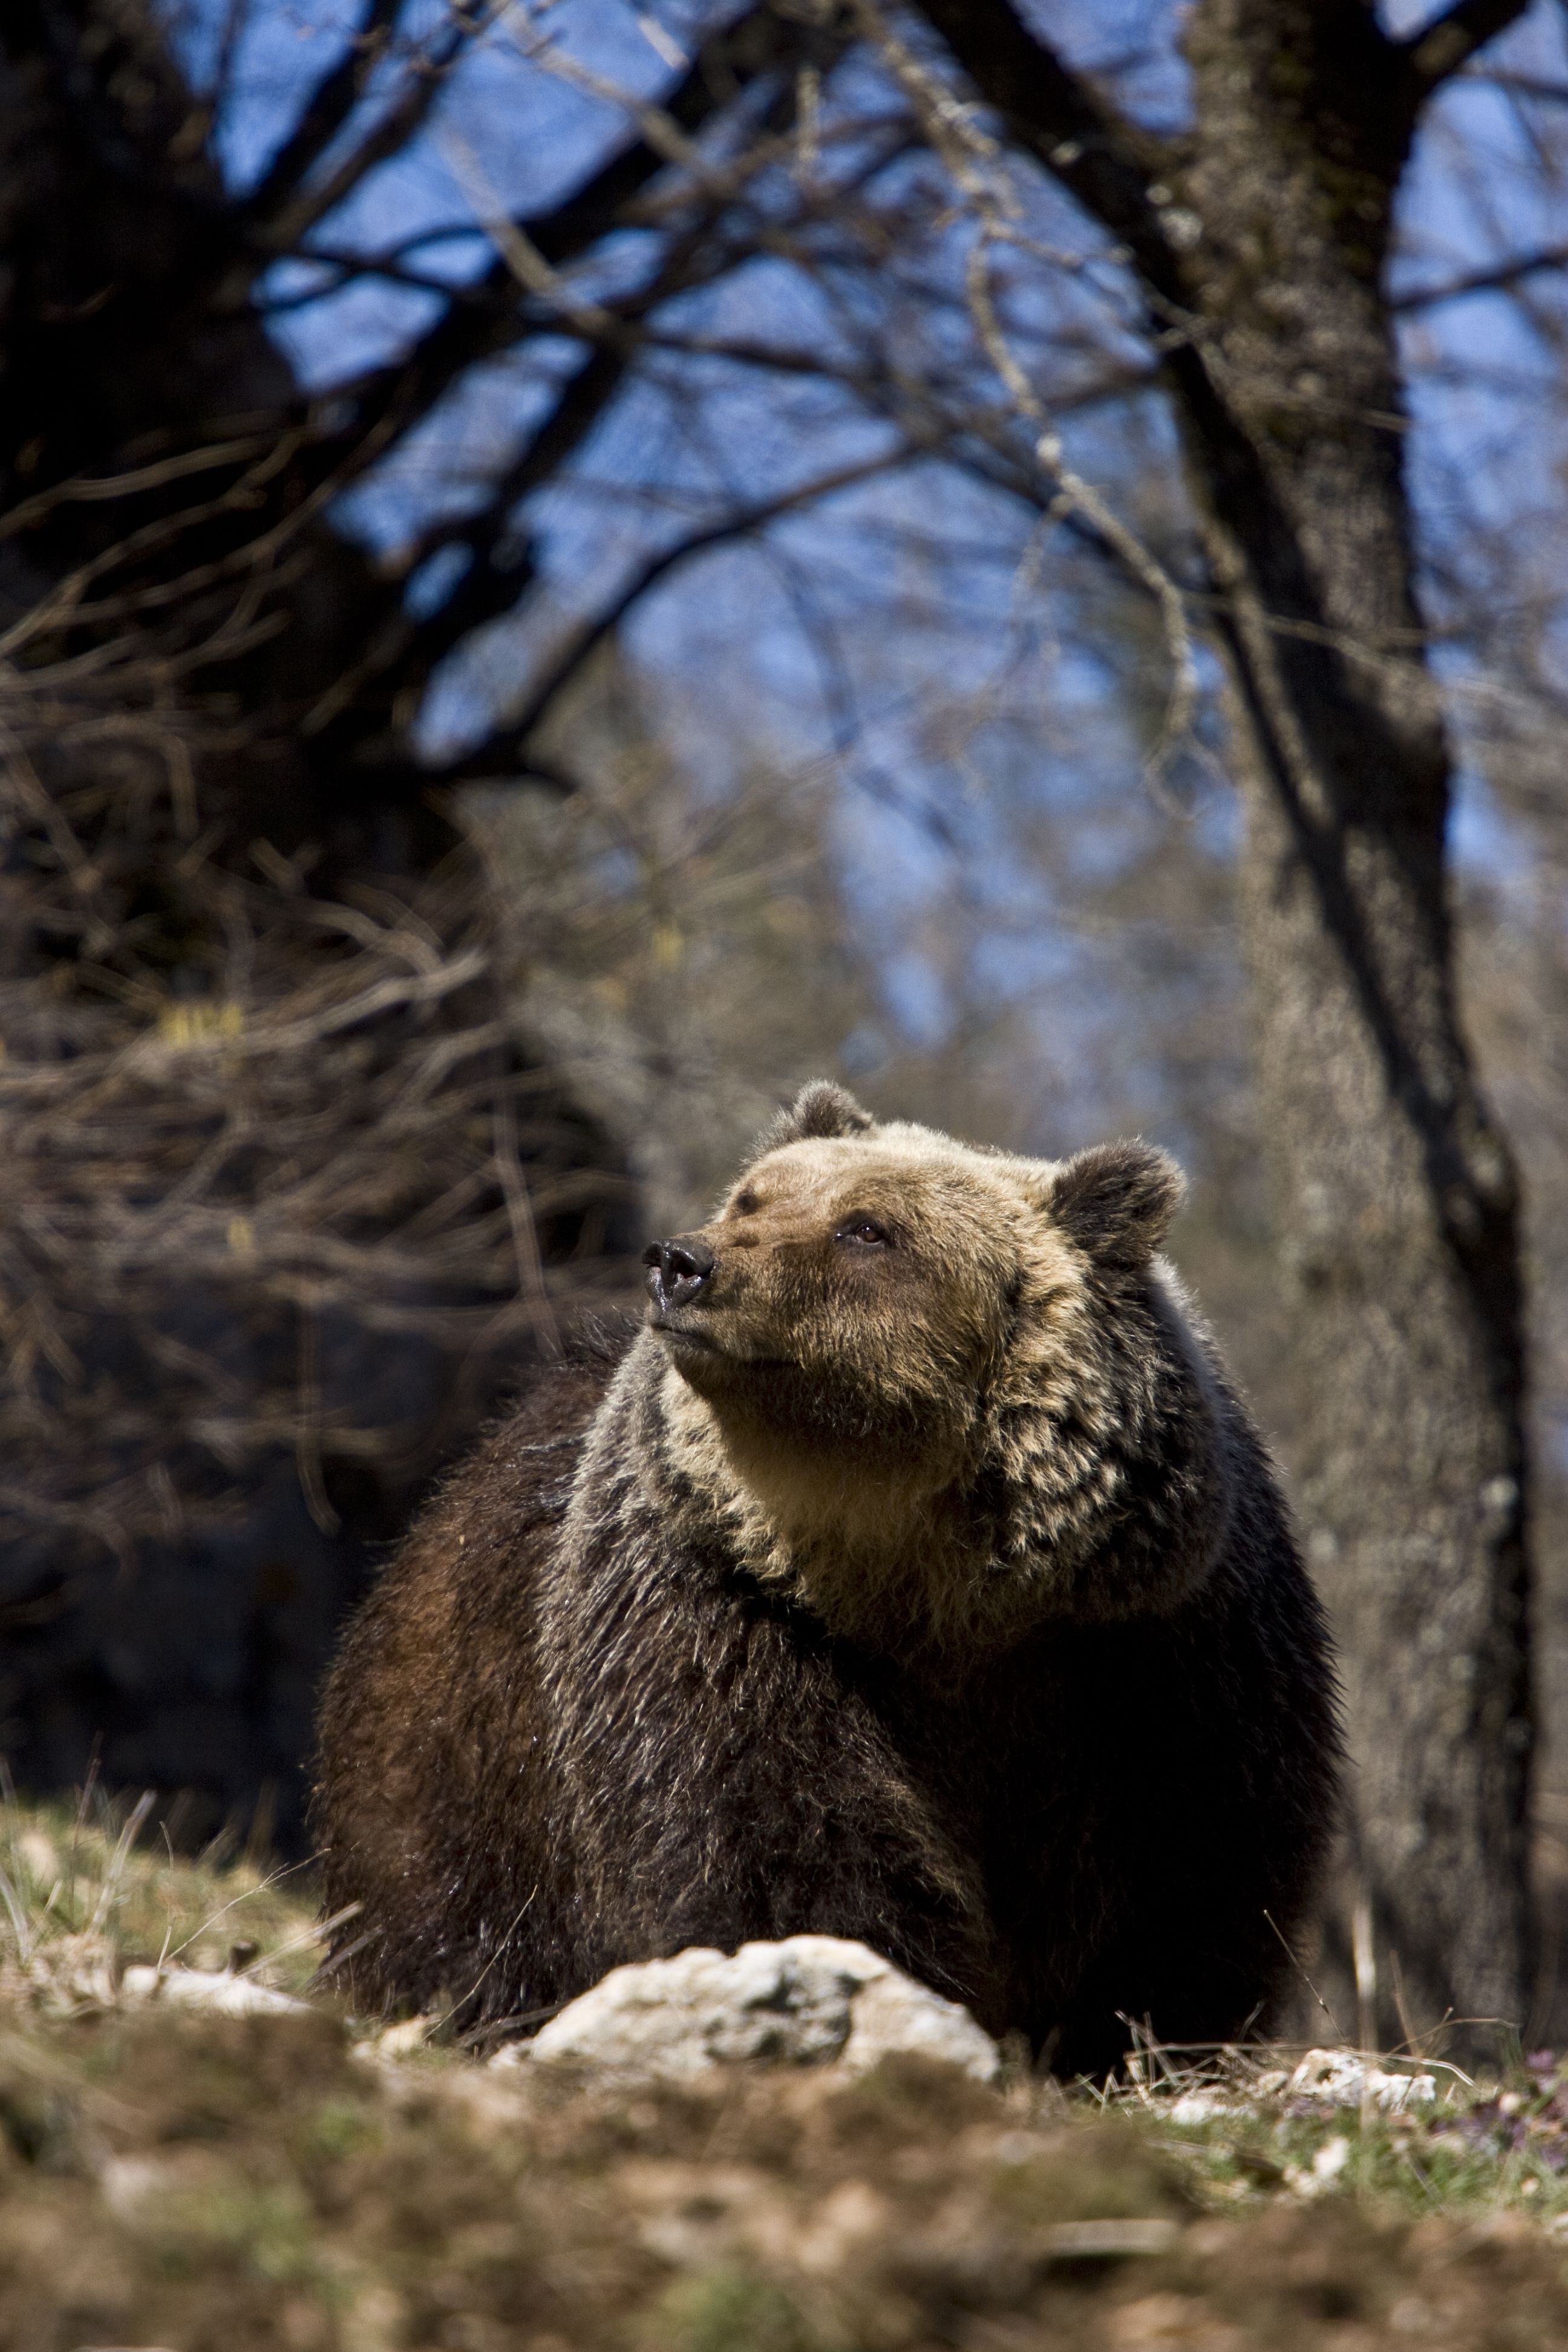 The brown bear as start-up for Rewilding Apennines ...